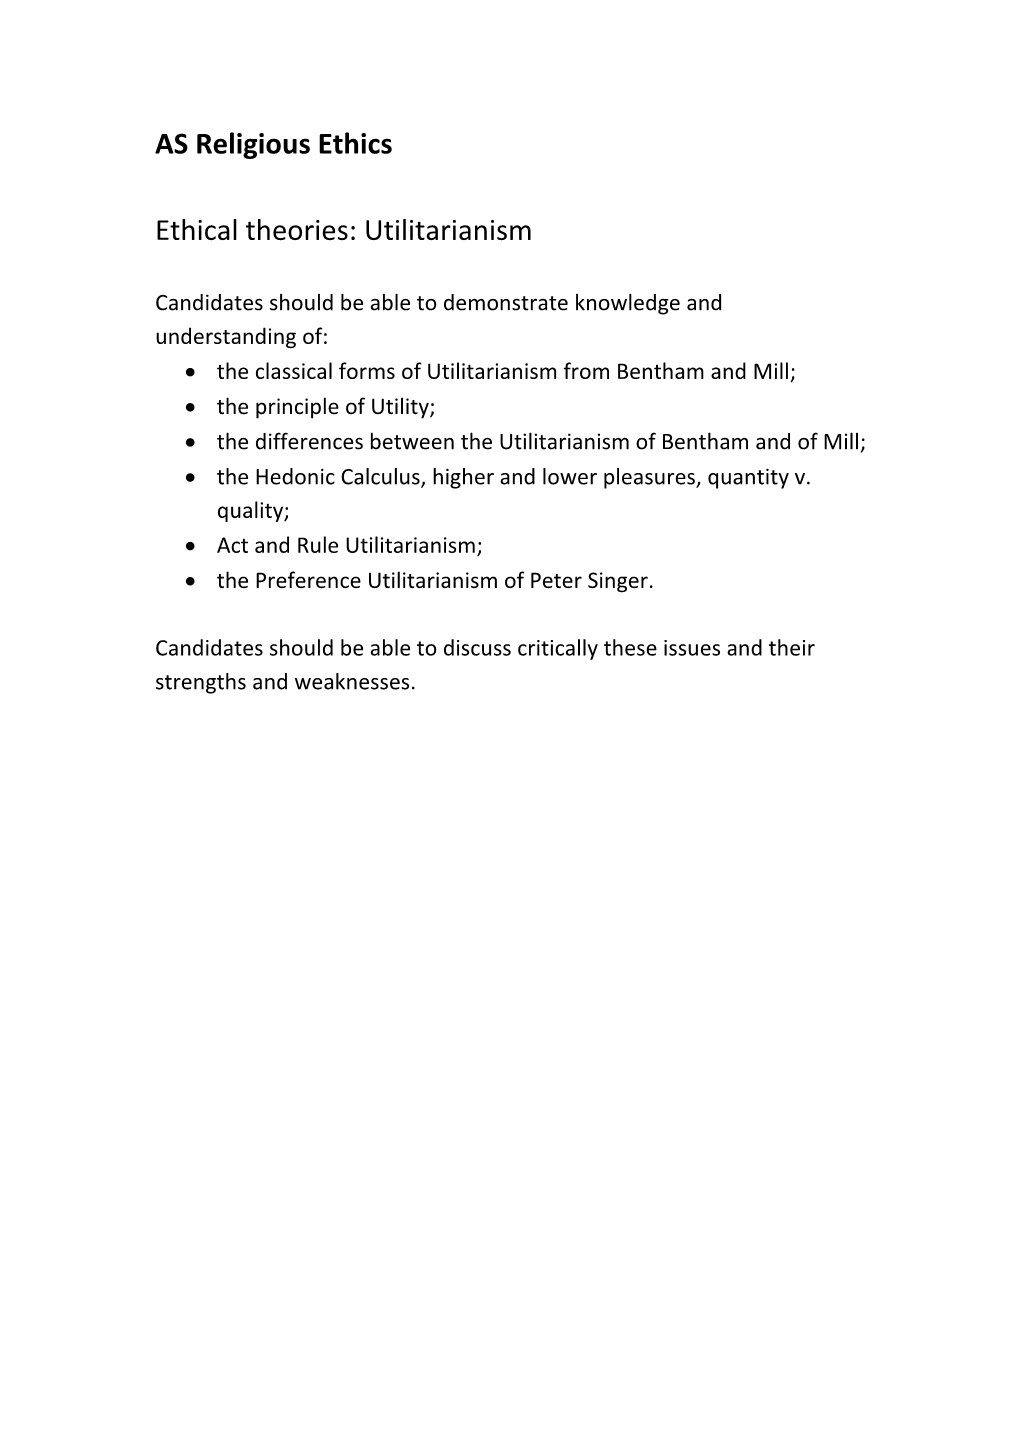 Ethical Theories: Utilitarianism s1